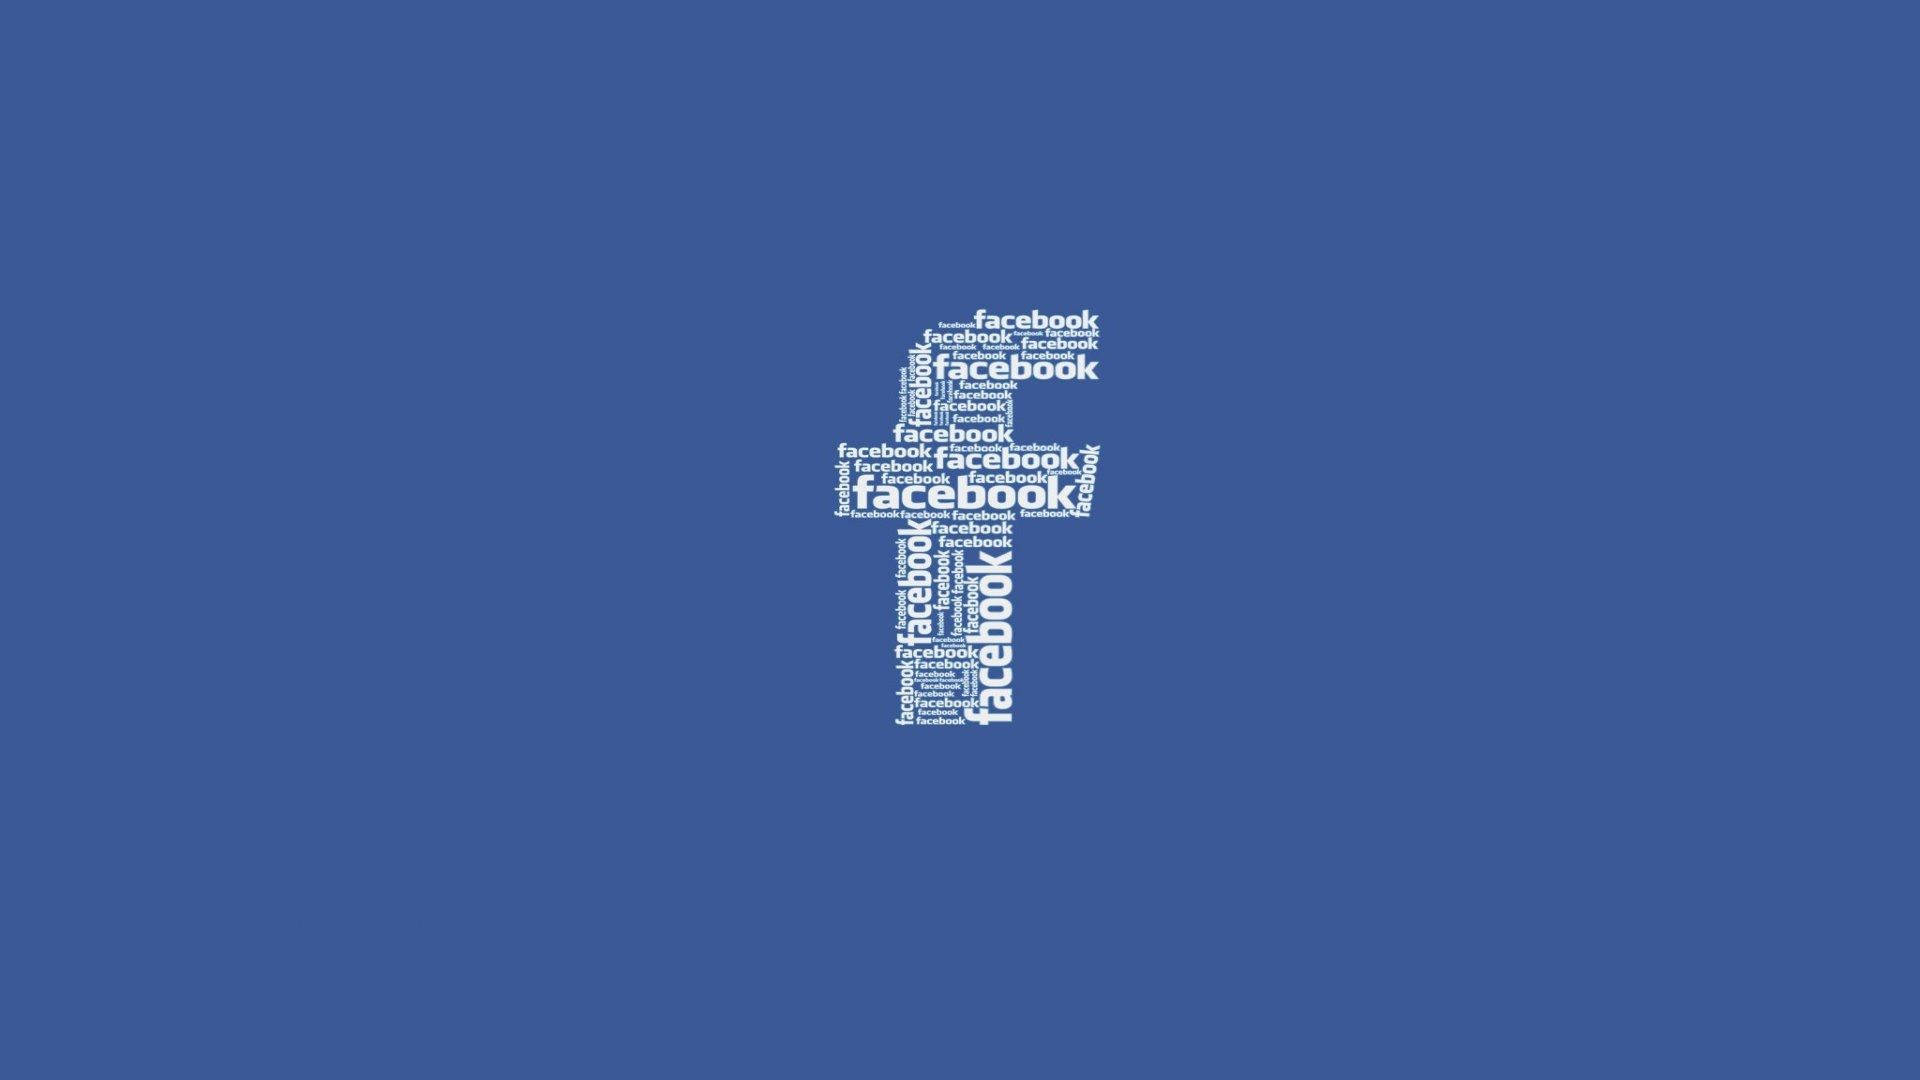 Facebook Word Cloud Collage Background